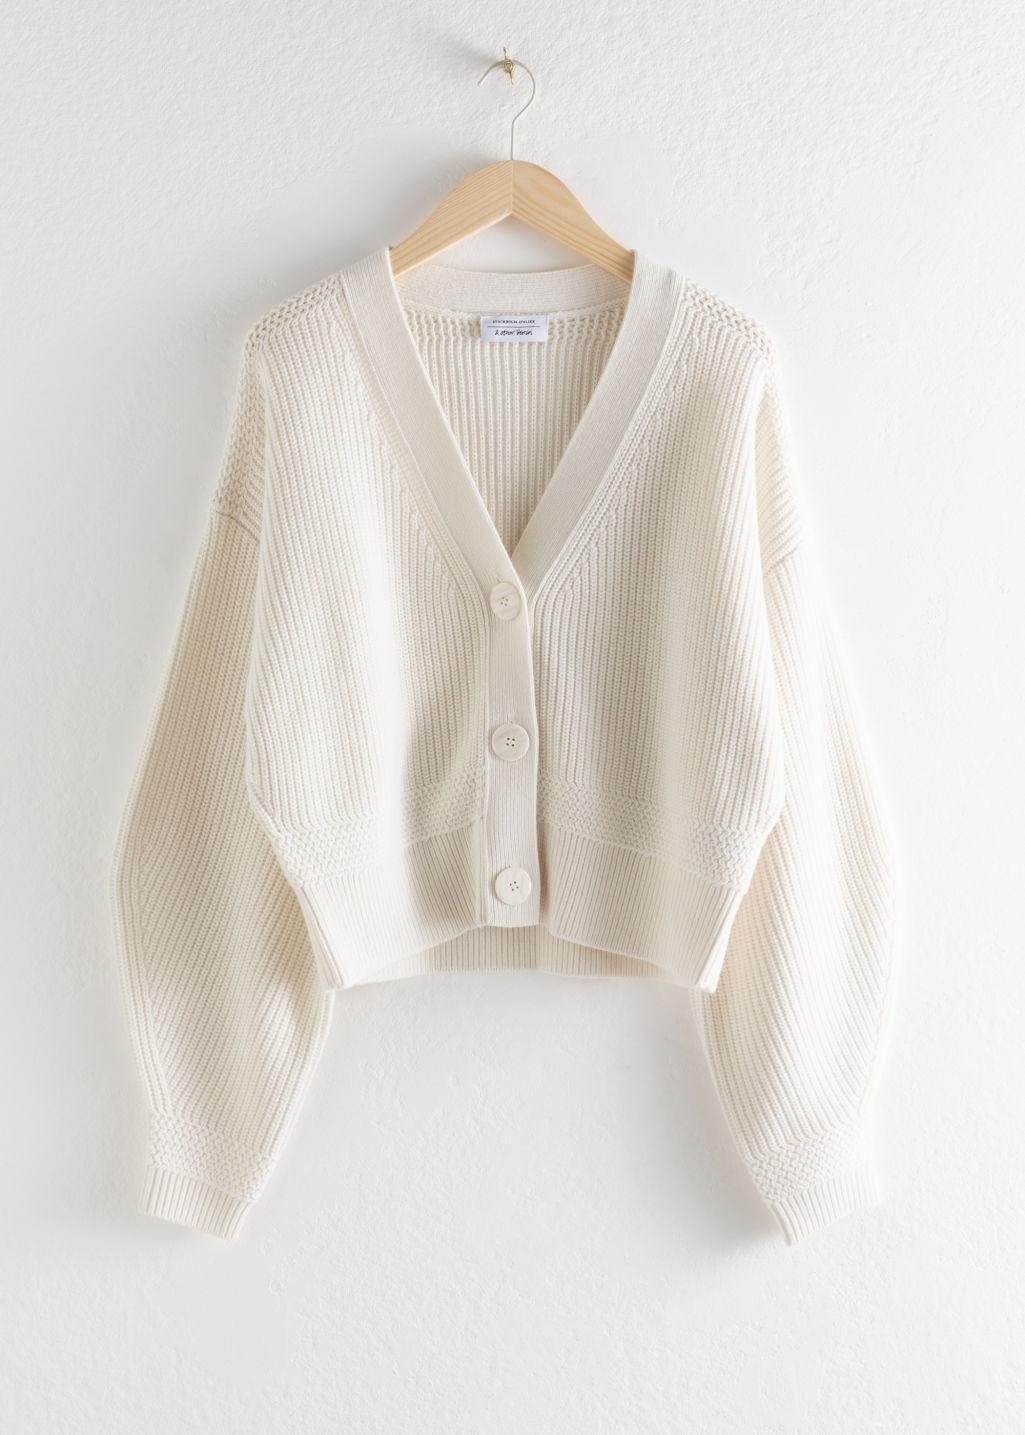 & Other Stories Cropped Cardigan in White - Lyst